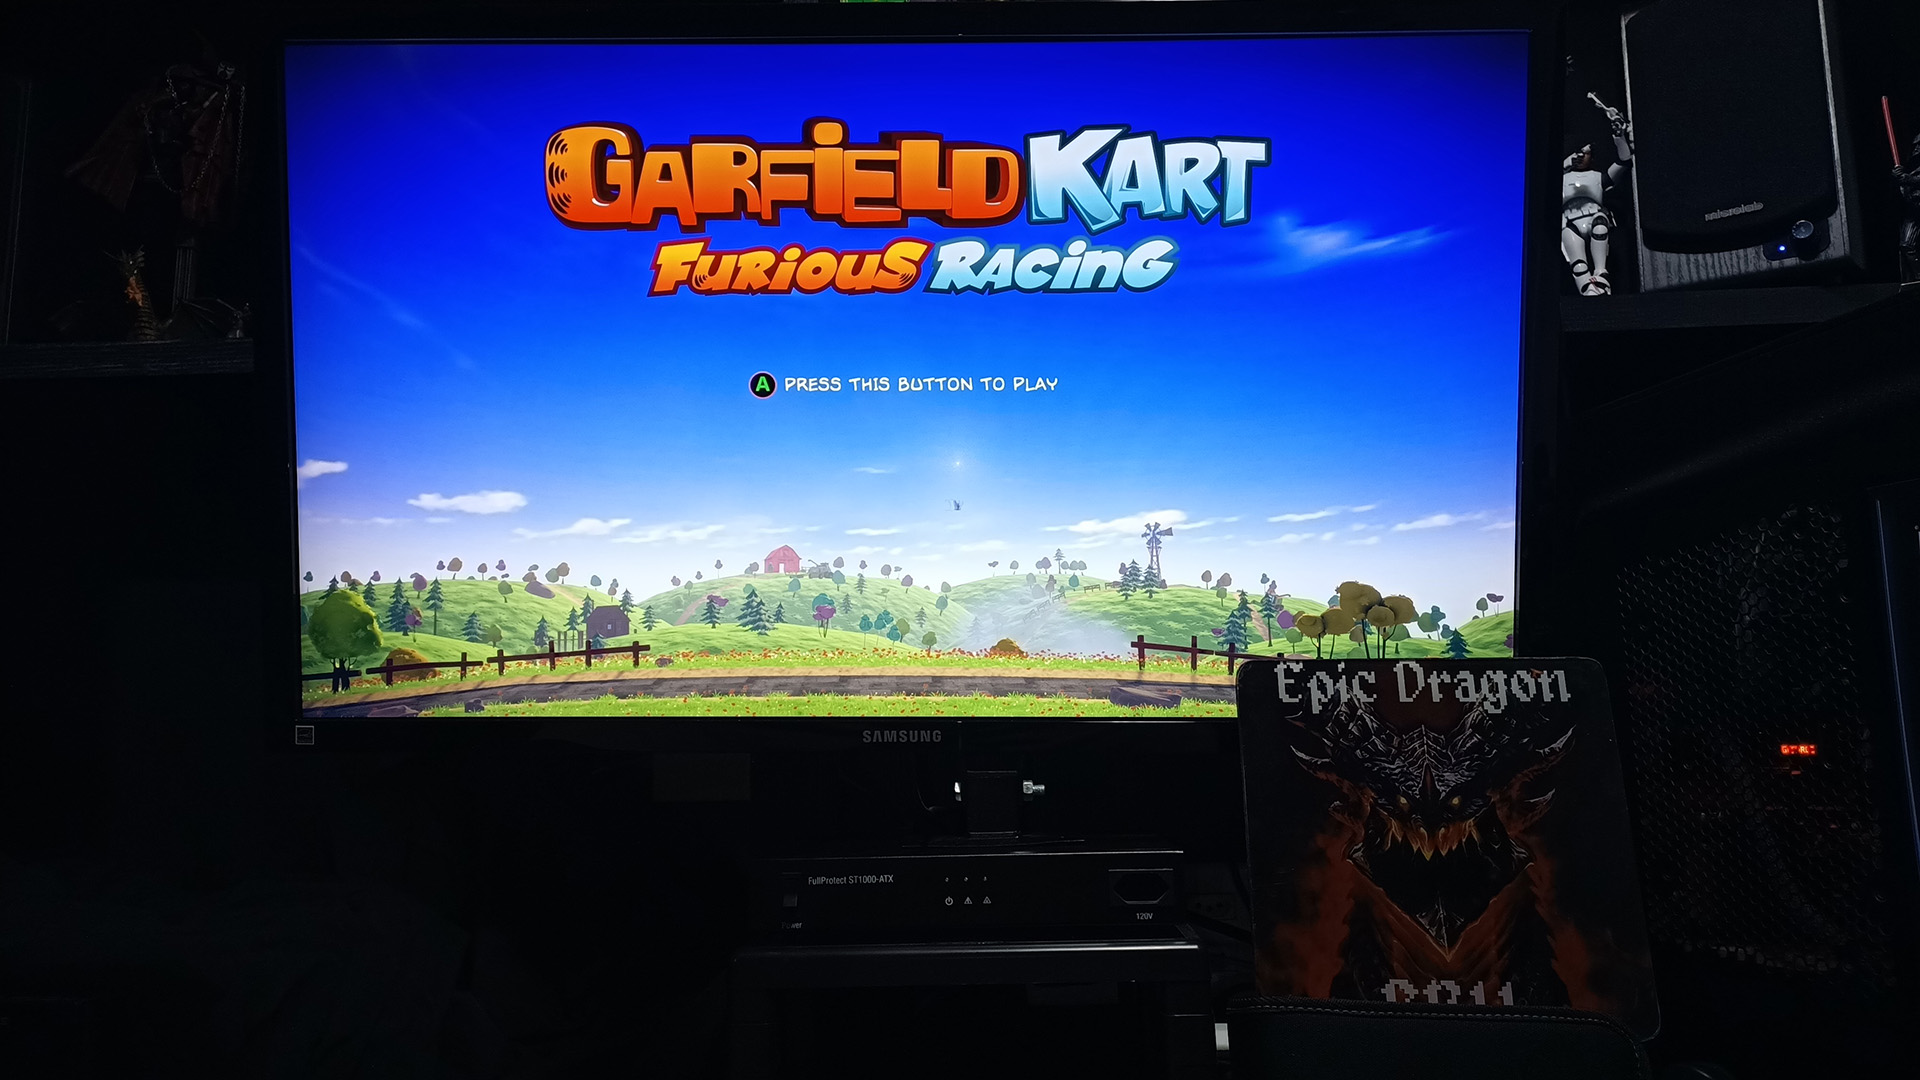 EpicDragon: Garfield Kart Furious Racing: Blazing Oasis [Time Trial: 3 Laps] (PC) 0:02:43.79 points on 2022-08-05 17:24:37